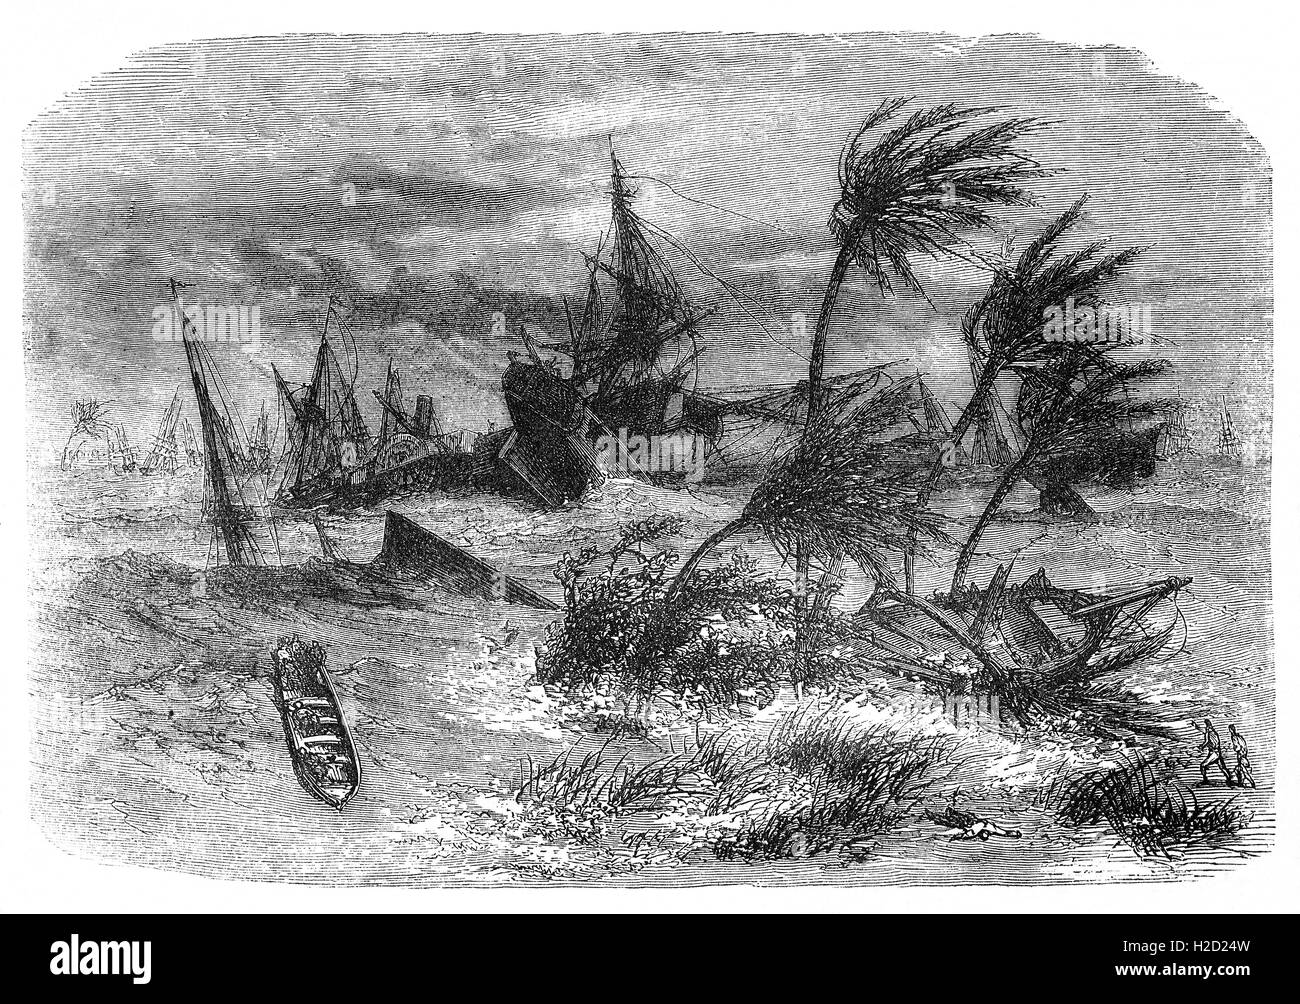 On October 5, 1864,  a powerful cyclone hit near Calcutta, India, killing around 60,000 people.  Over 100 brick homes and tens of thousands of tiled and straw huts were leveled. Of the ships in the harbour, 172 out of 195, were either damaged or destroyed. Stock Photo